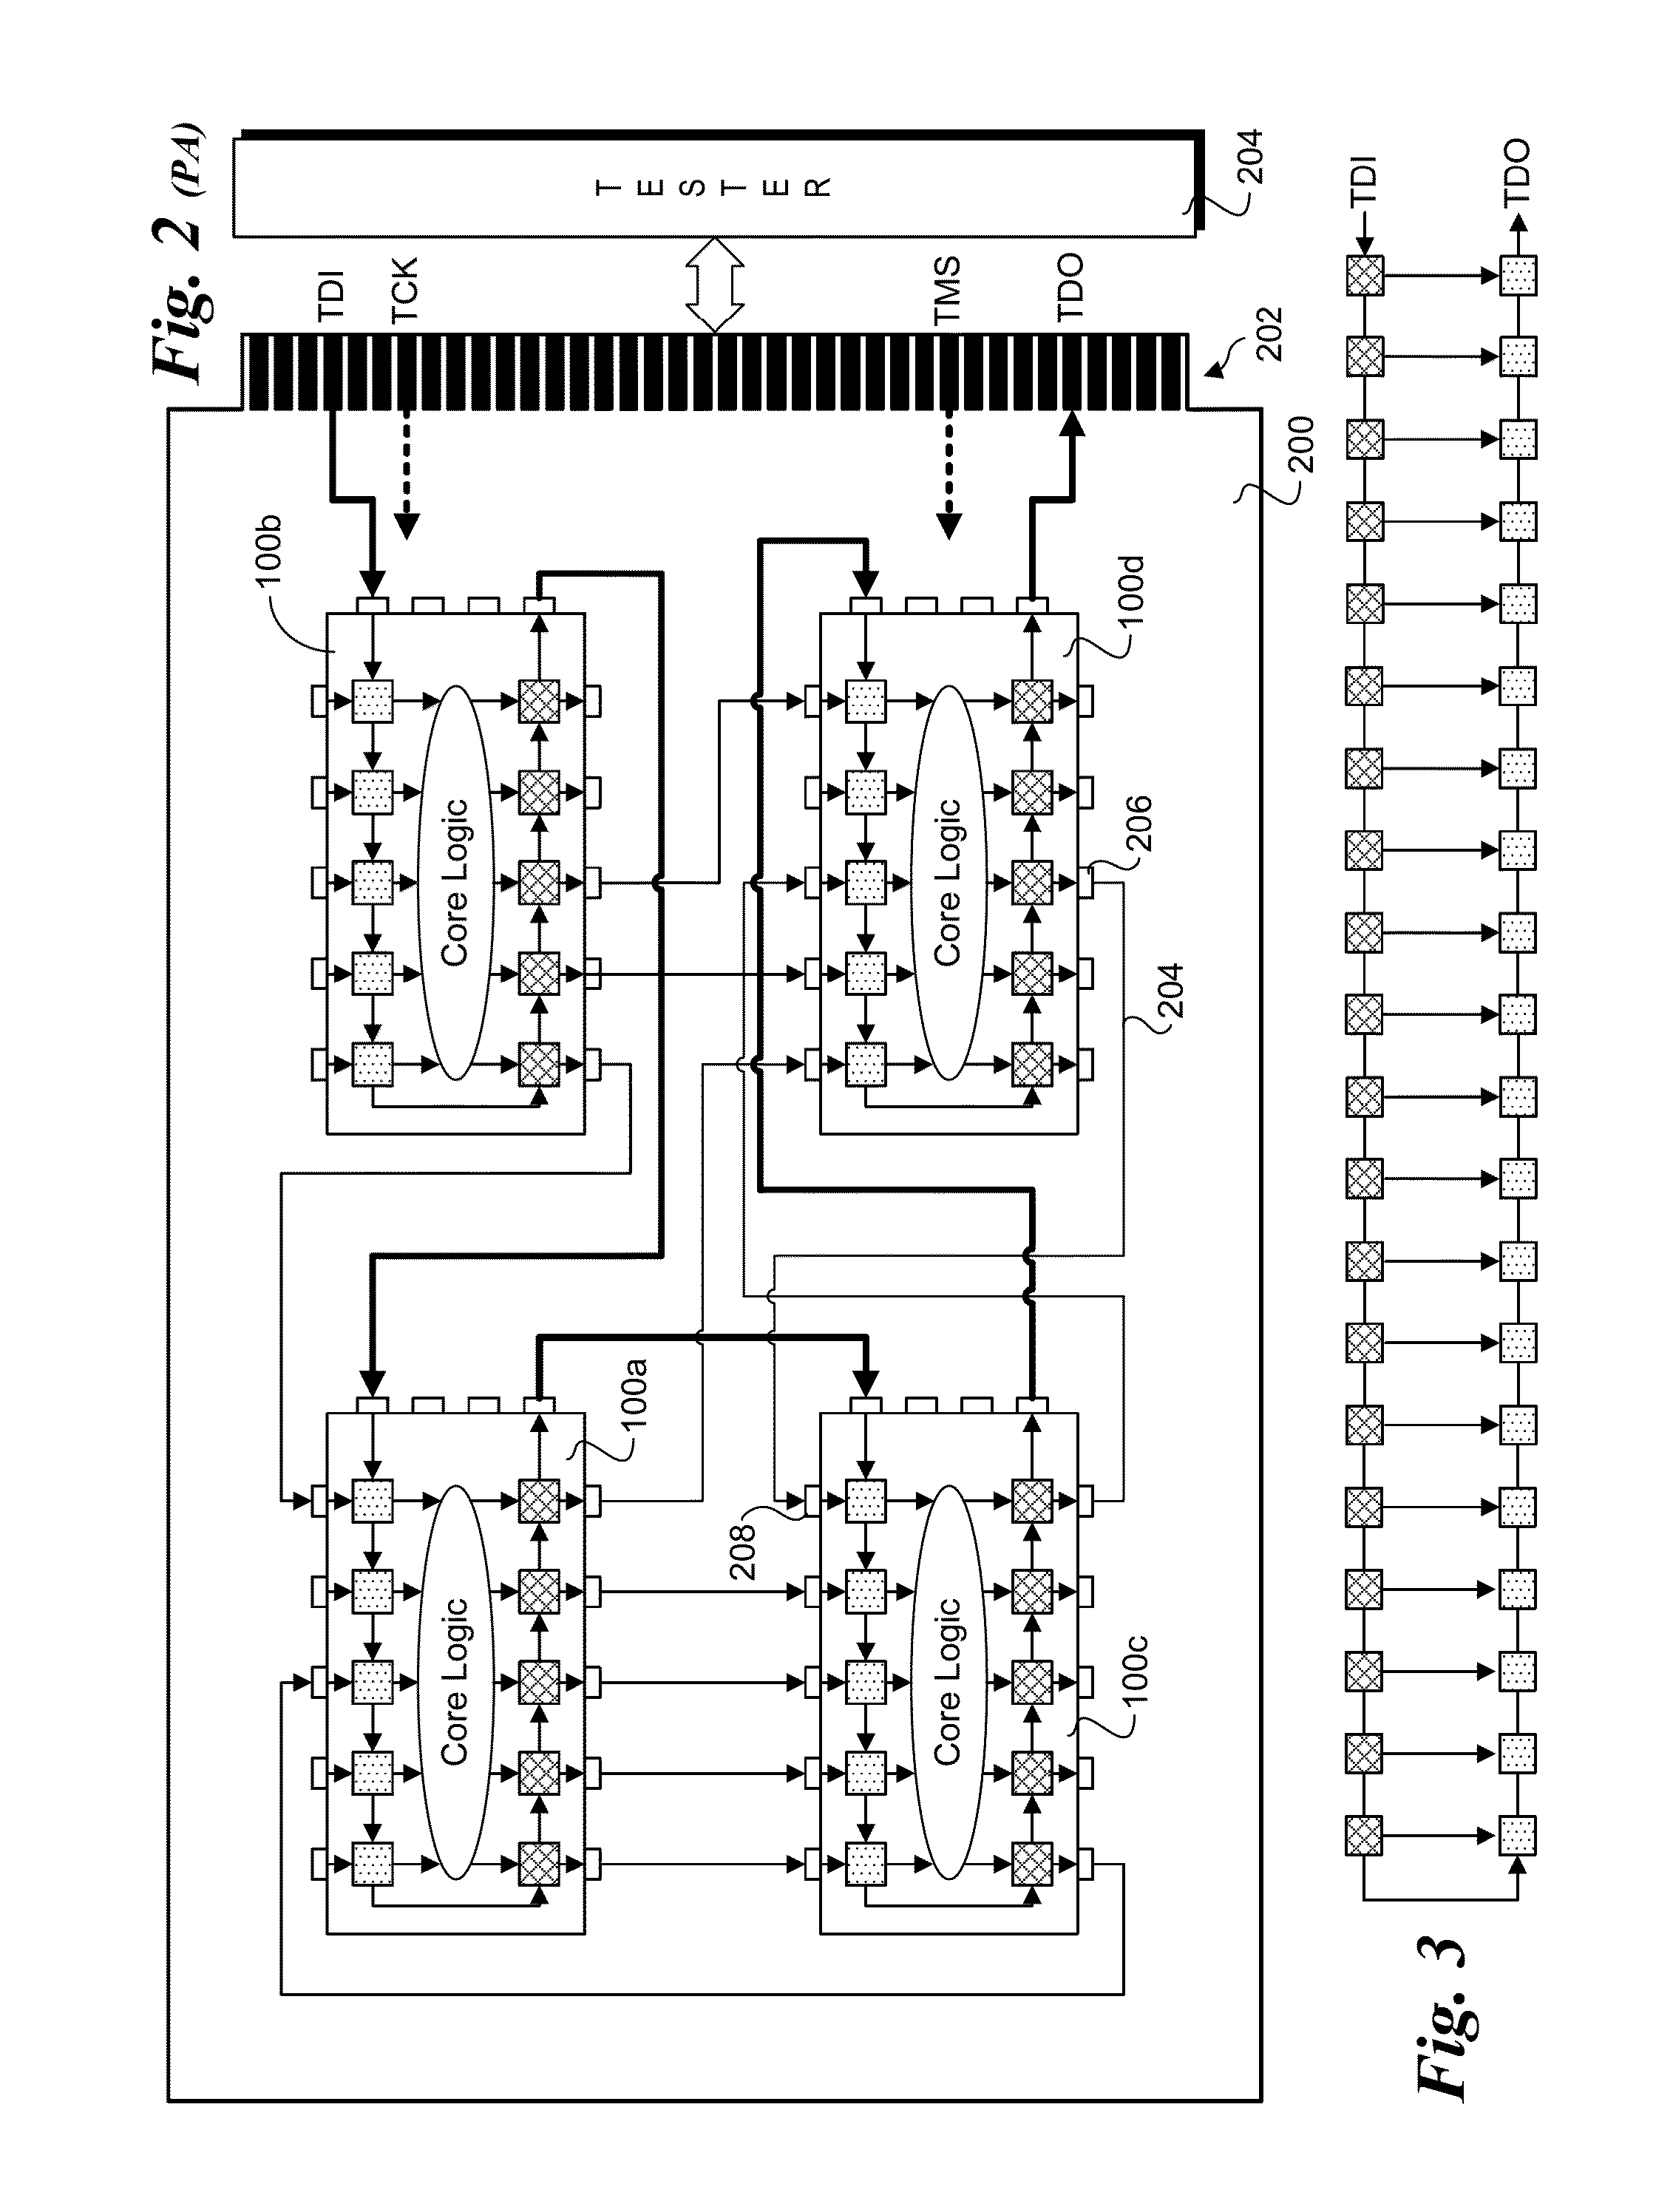 Method and apparatus for testing I/O boundary scan chain for soc's having I/O's powered off by default